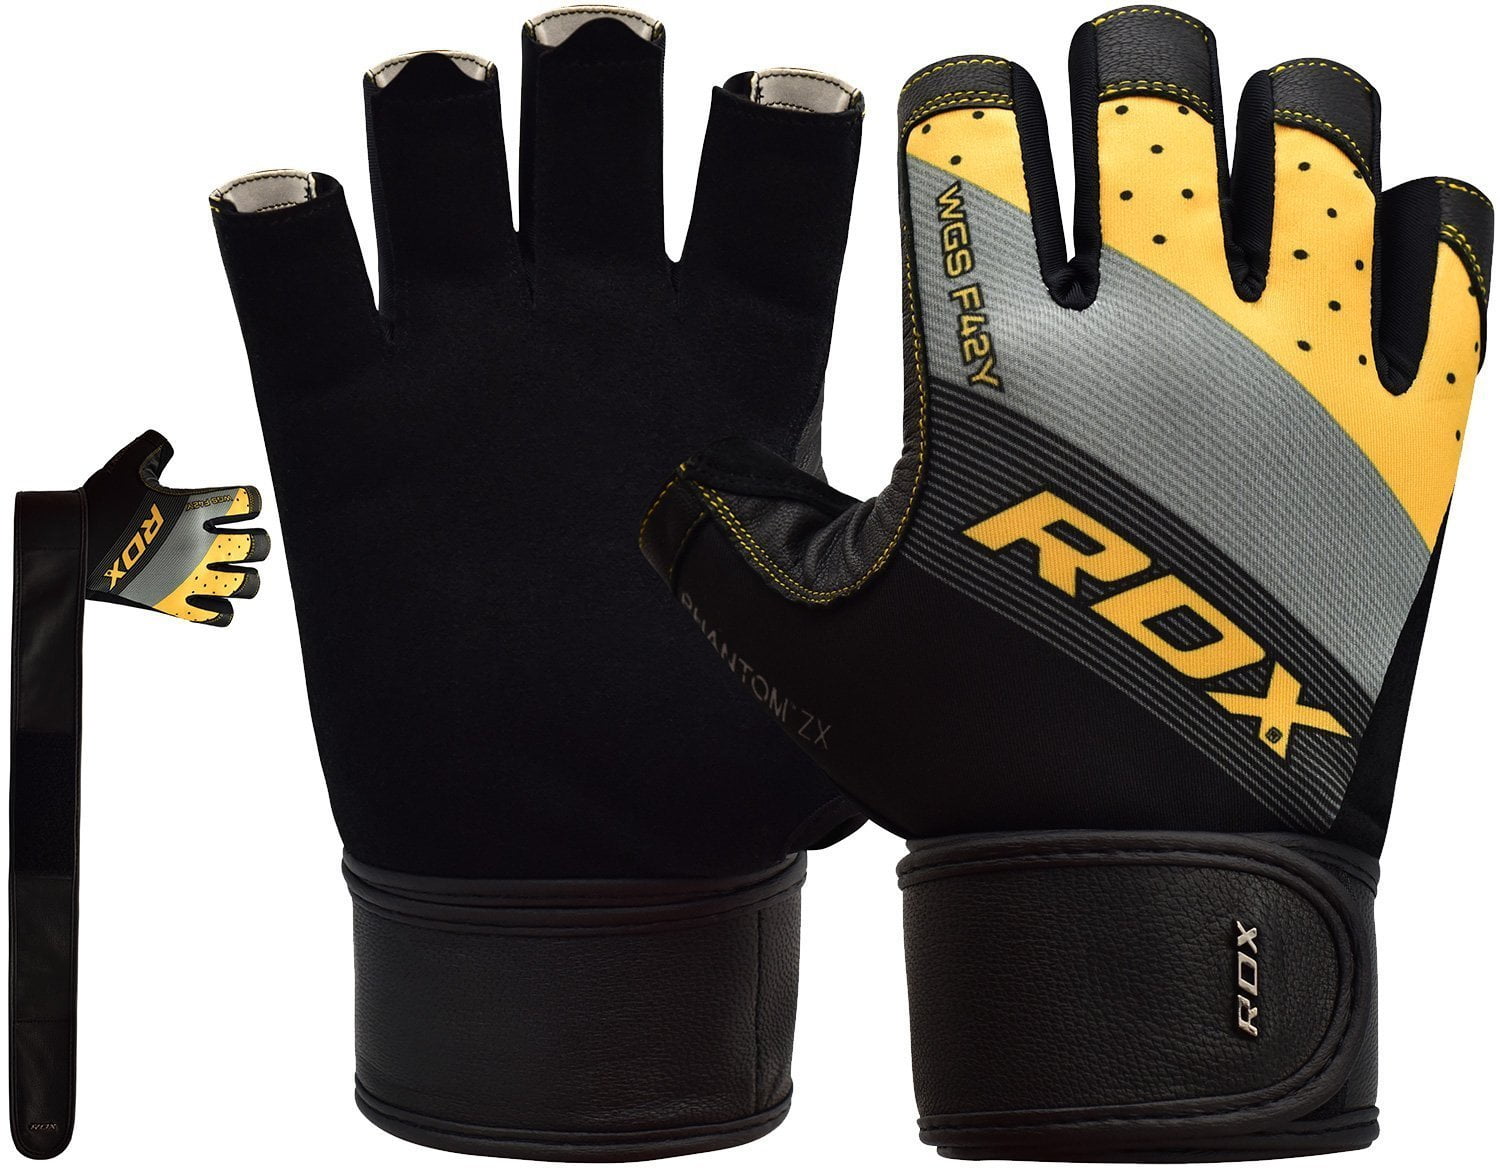 RDX Weight Lifting Gloves for Gym Workout Weightlifting Cycling & Exercise Bodybuilding Breathable with Padded Anti Slip Palm Protection Strength Training Powerlifting Great for Fitness